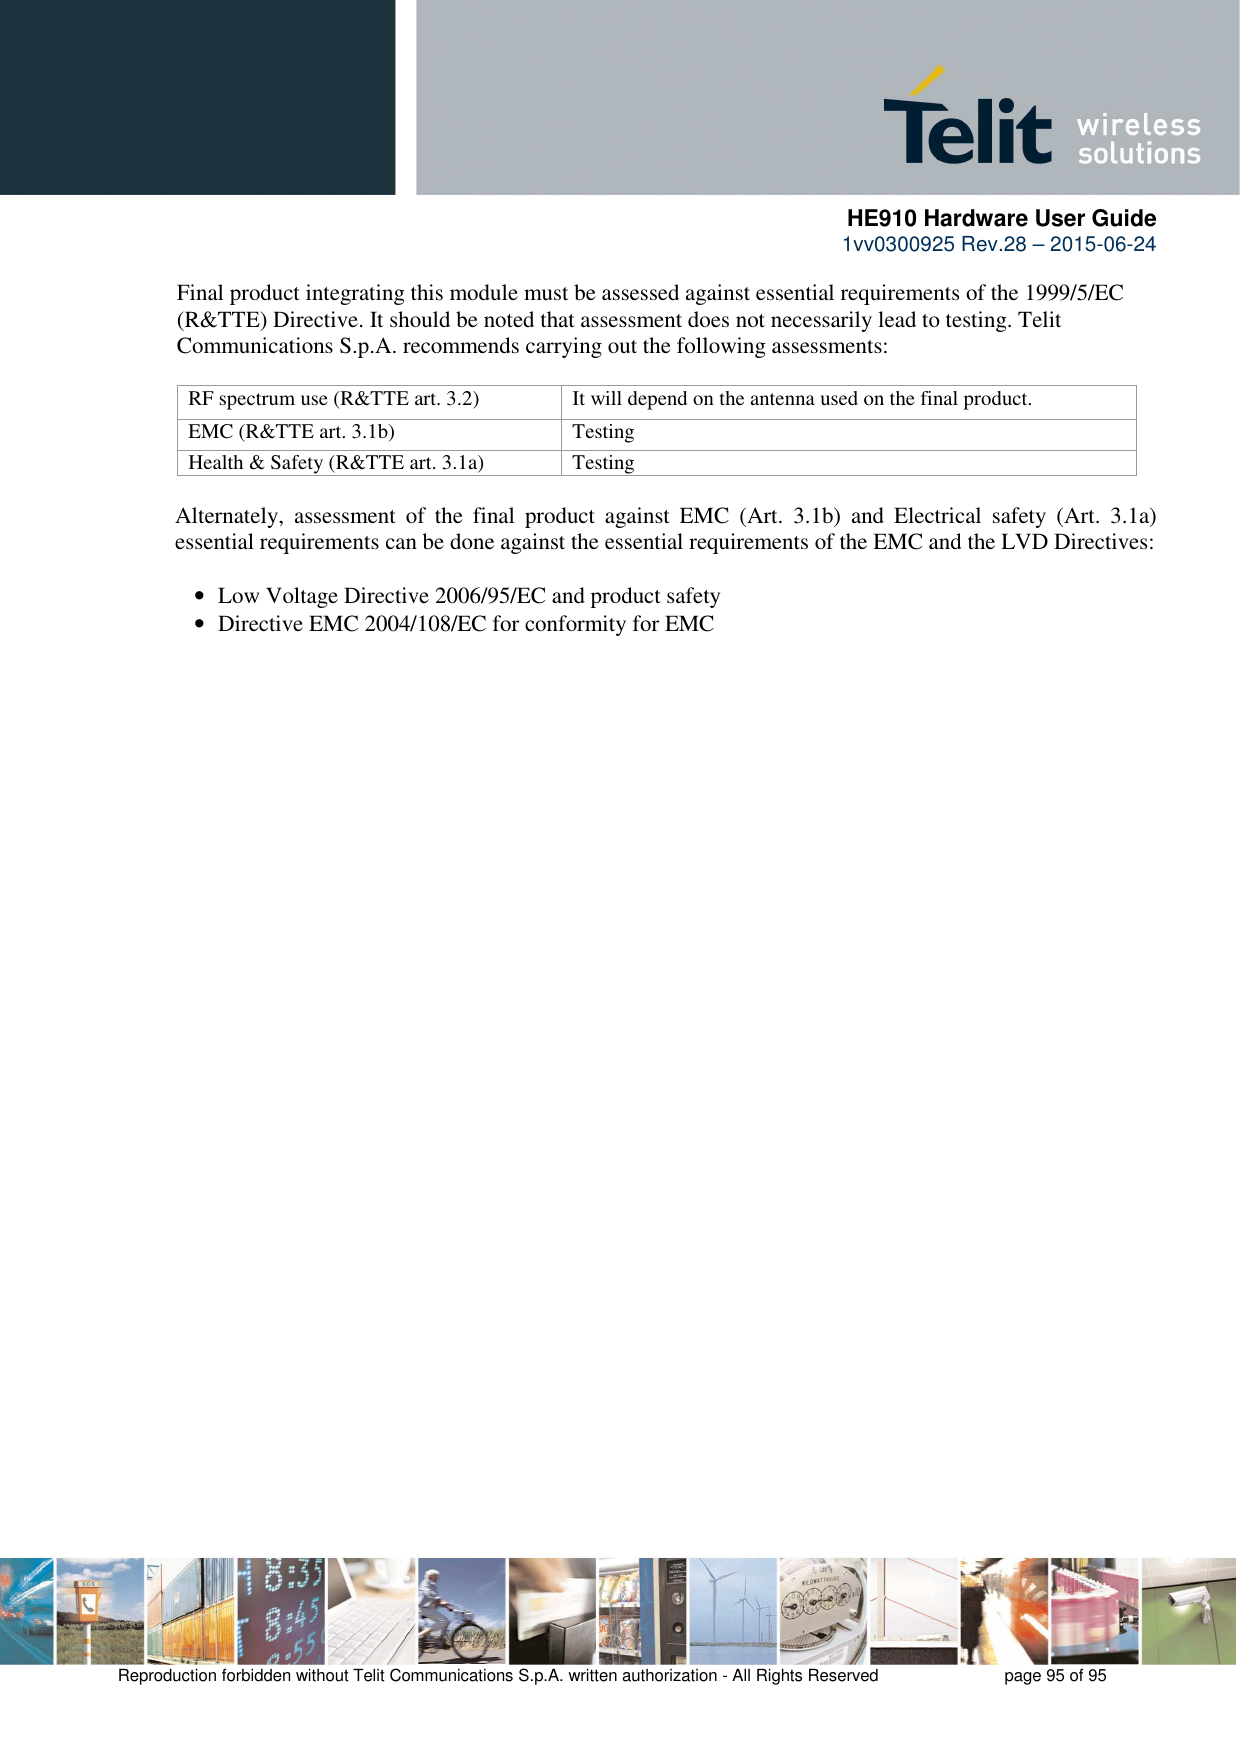      HE910 Hardware User Guide 1vv0300925 Rev.28 – 2015-06-24    Reproduction forbidden without Telit Communications S.p.A. written authorization - All Rights Reserved    page 95 of 95  Final product integrating this module must be assessed against essential requirements of the 1999/5/EC (R&amp;TTE) Directive. It should be noted that assessment does not necessarily lead to testing. Telit Communications S.p.A. recommends carrying out the following assessments:  RF spectrum use (R&amp;TTE art. 3.2)  It will depend on the antenna used on the final product. EMC (R&amp;TTE art. 3.1b)  Testing Health &amp; Safety (R&amp;TTE art. 3.1a)  Testing  Alternately,  assessment  of  the  final  product  against  EMC  (Art.  3.1b)  and  Electrical  safety  (Art.  3.1a) essential requirements can be done against the essential requirements of the EMC and the LVD Directives:  •   Low Voltage Directive 2006/95/EC and product safety •   Directive EMC 2004/108/EC for conformity for EMC 